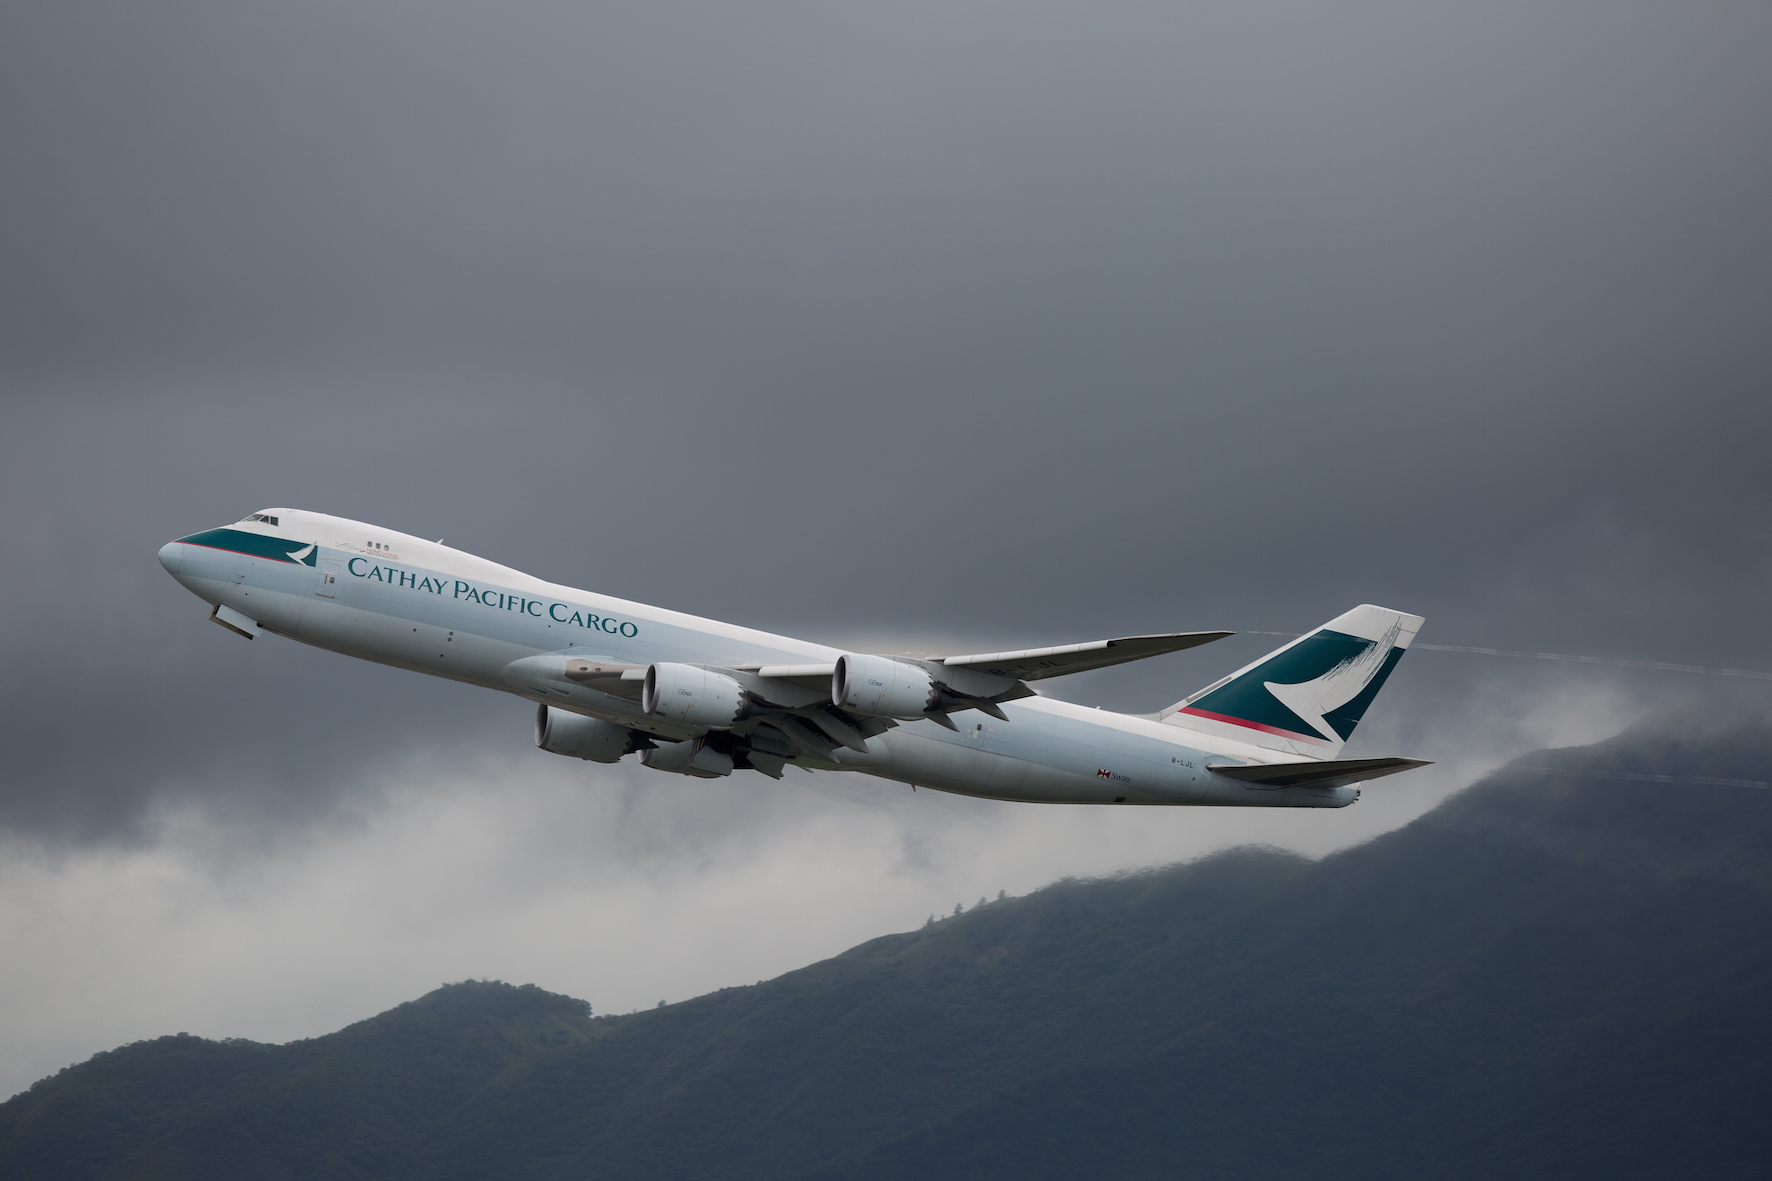 HUGE DECLINE. A Cathay Pacific cargo plane takes off from Hong Kong International Airport on August 17, 2016. Photo by Jerome Favre/EPA  